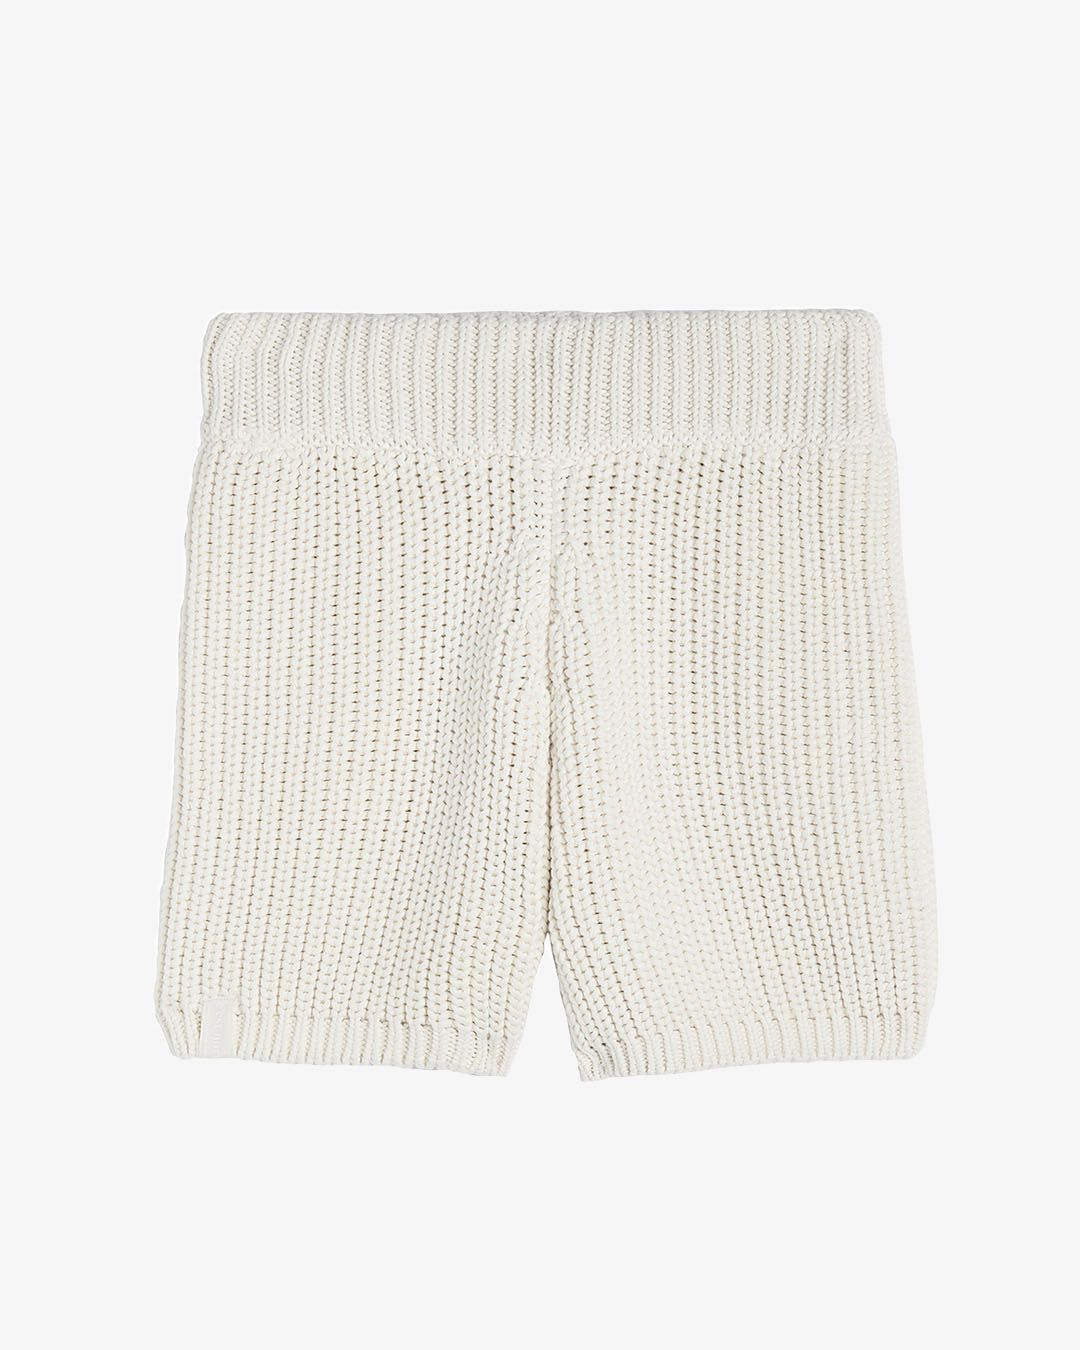 The Knit Shorts